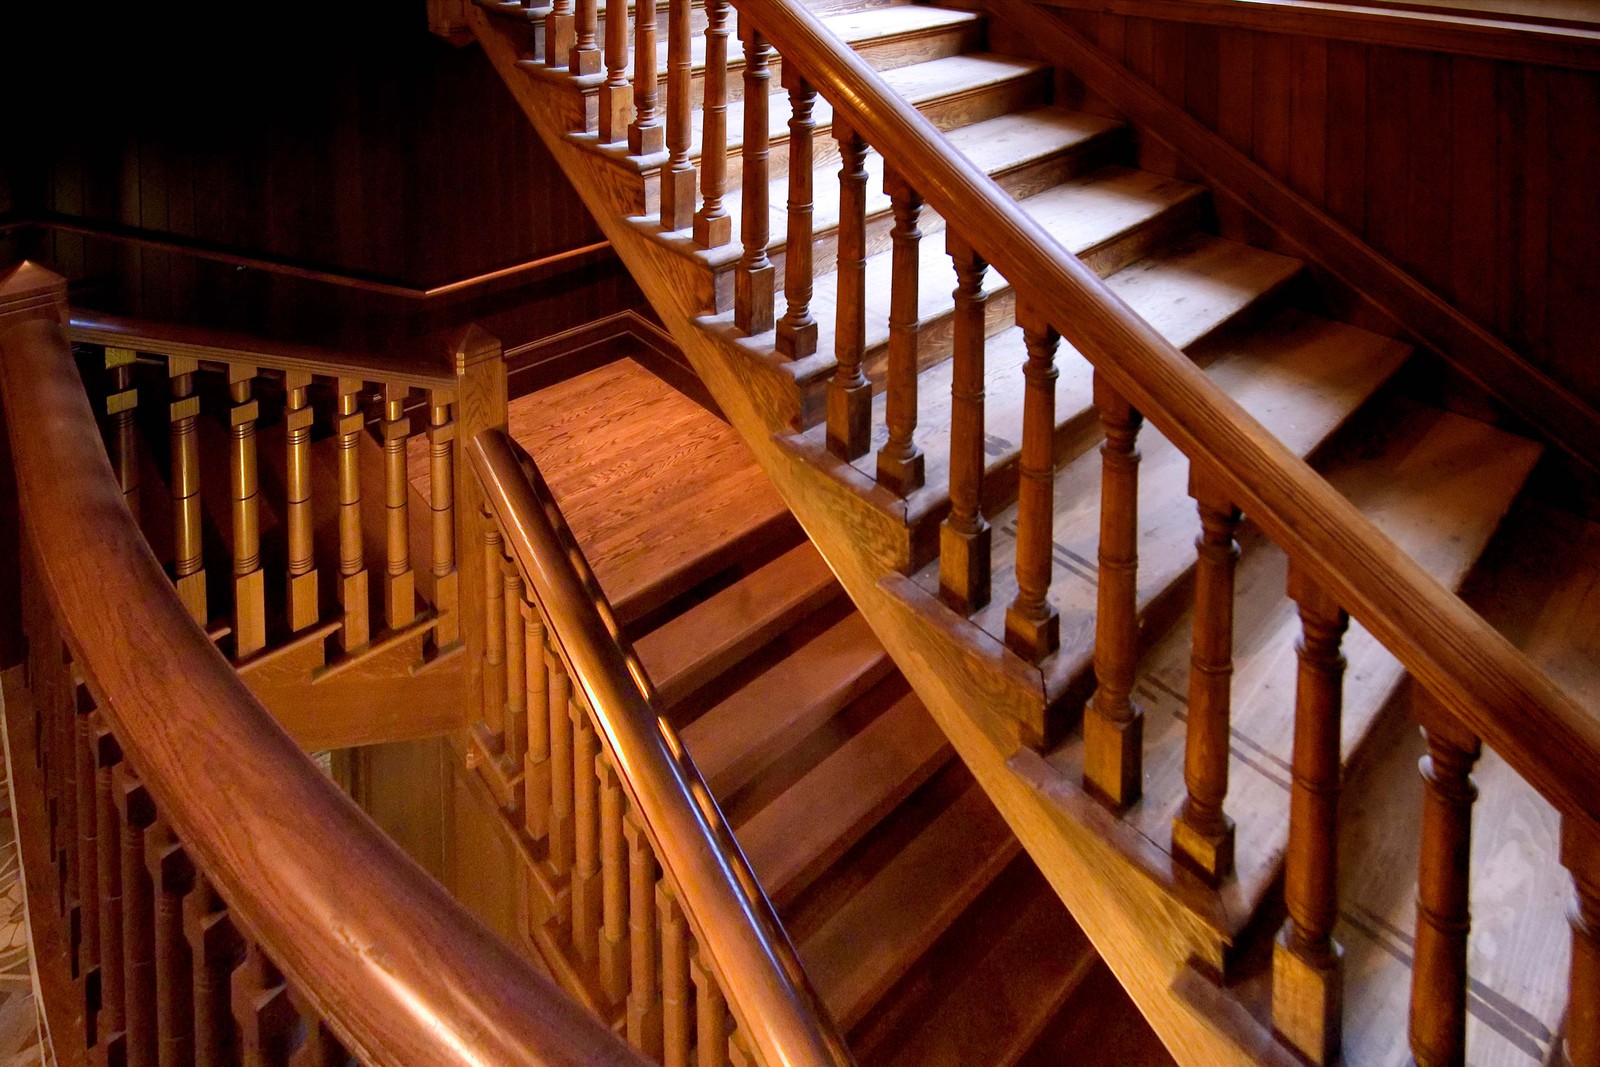 Restored handrail and stairs for this historic staircase.